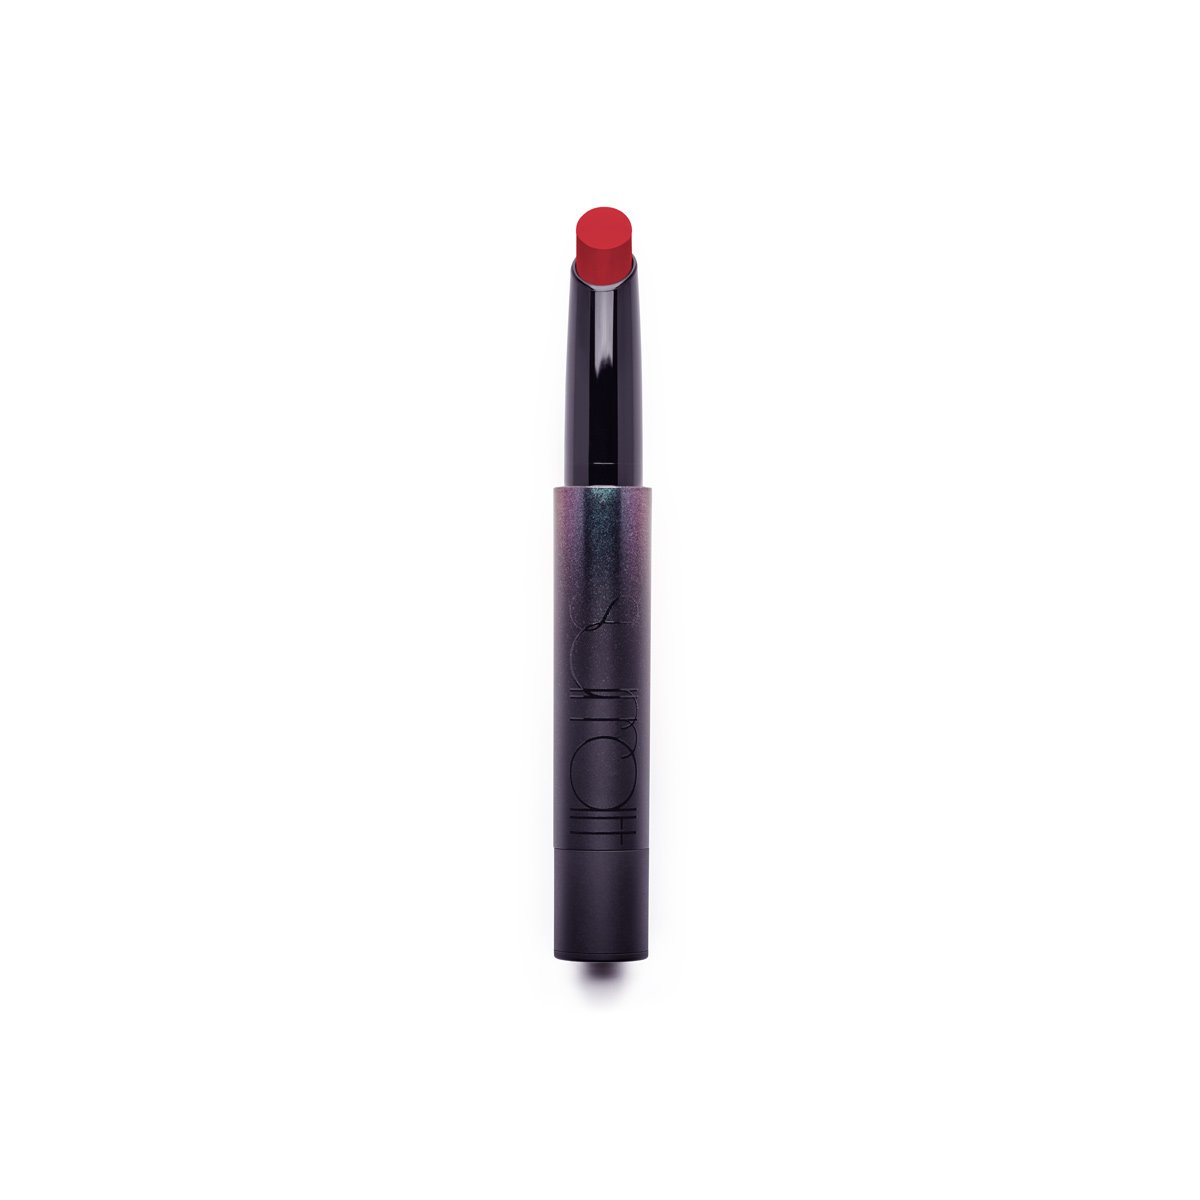 Coquette: Dior Rouge Dior Couture Lipstick Refill Set: Get It Before It's  Gone!